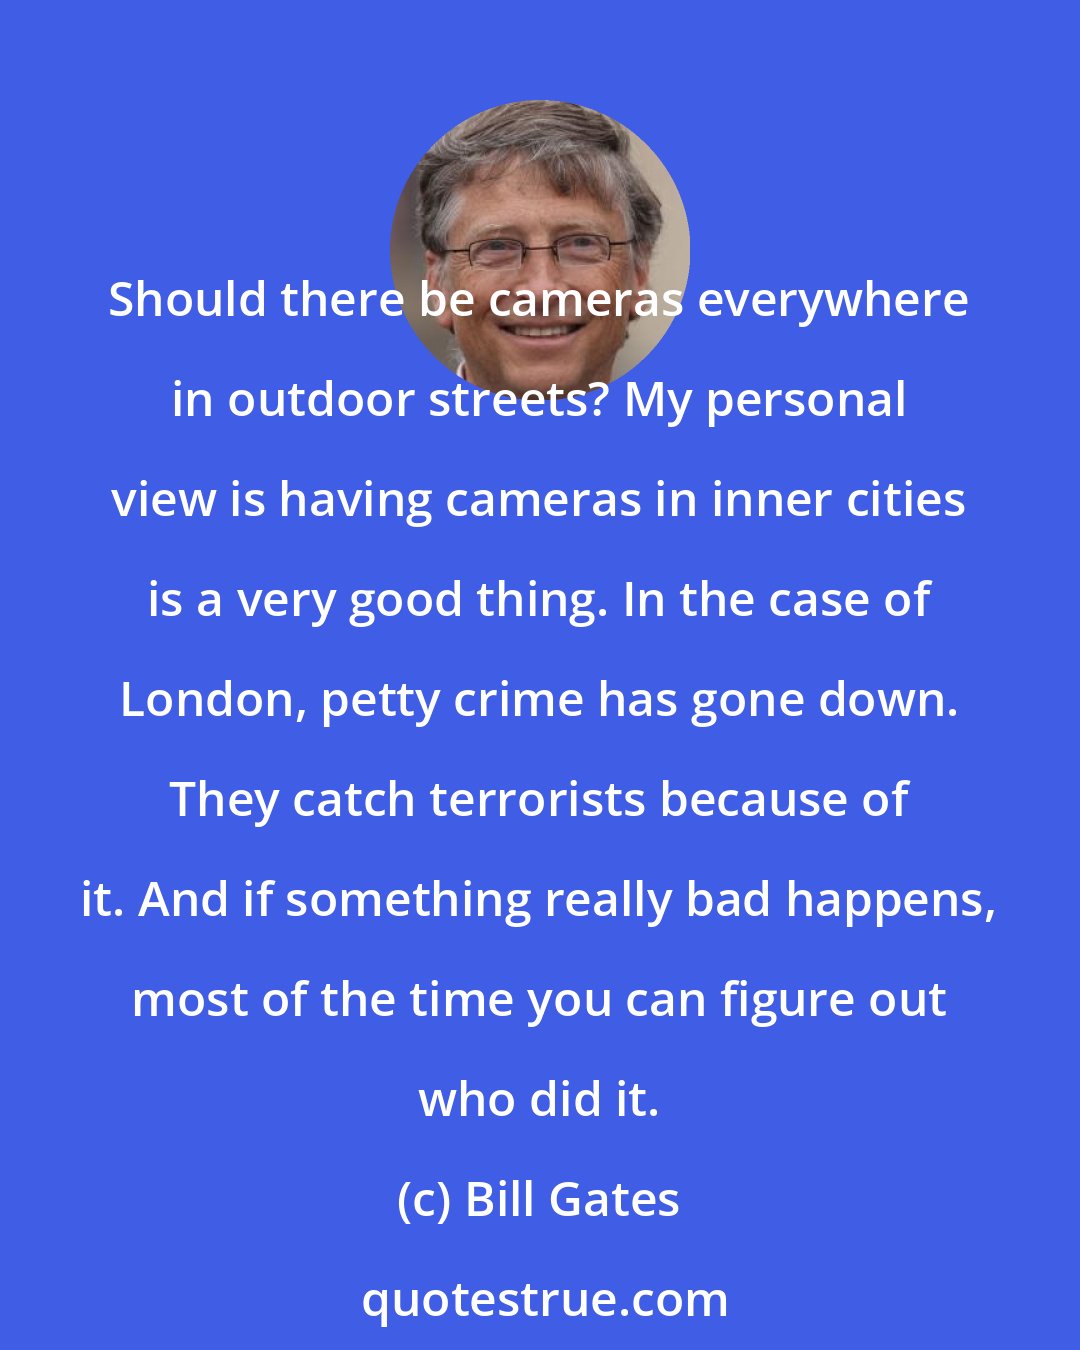 Bill Gates: Should there be cameras everywhere in outdoor streets? My personal view is having cameras in inner cities is a very good thing. In the case of London, petty crime has gone down. They catch terrorists because of it. And if something really bad happens, most of the time you can figure out who did it.